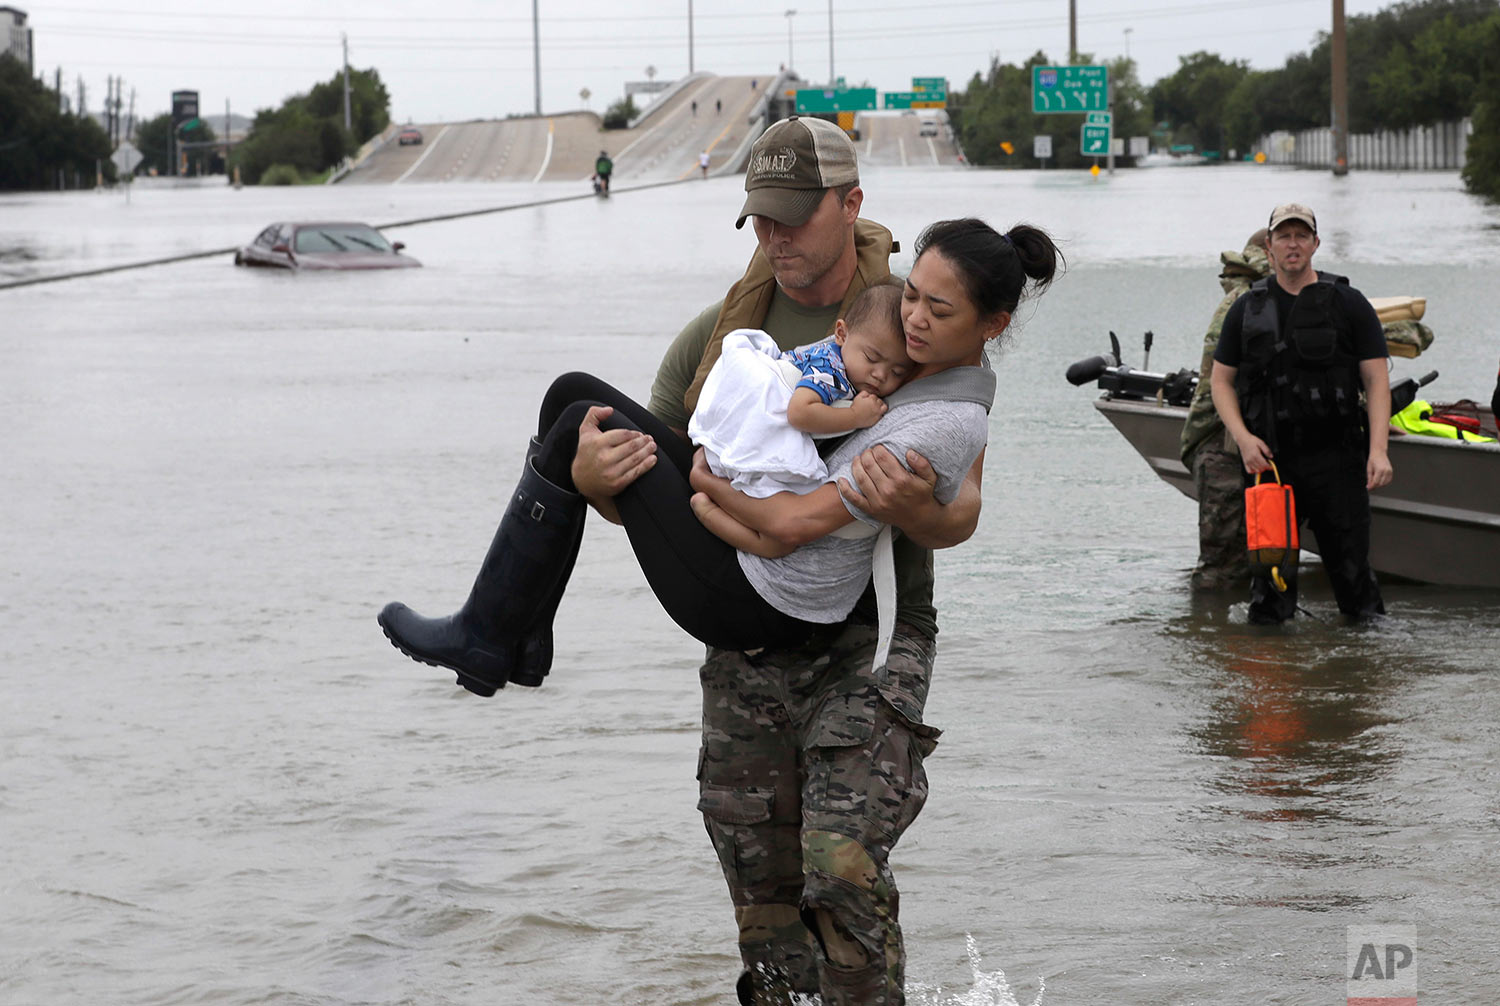 Houston Police SWAT officer Daryl Hudeck carries Connie Pham and her 13-month-old son Aiden after rescuing them from their home surrounded by floodwaters from Tropical Storm Harvey Sunday, Aug. 27, 2017, in Houston. (AP Photo/David J. Phillip)